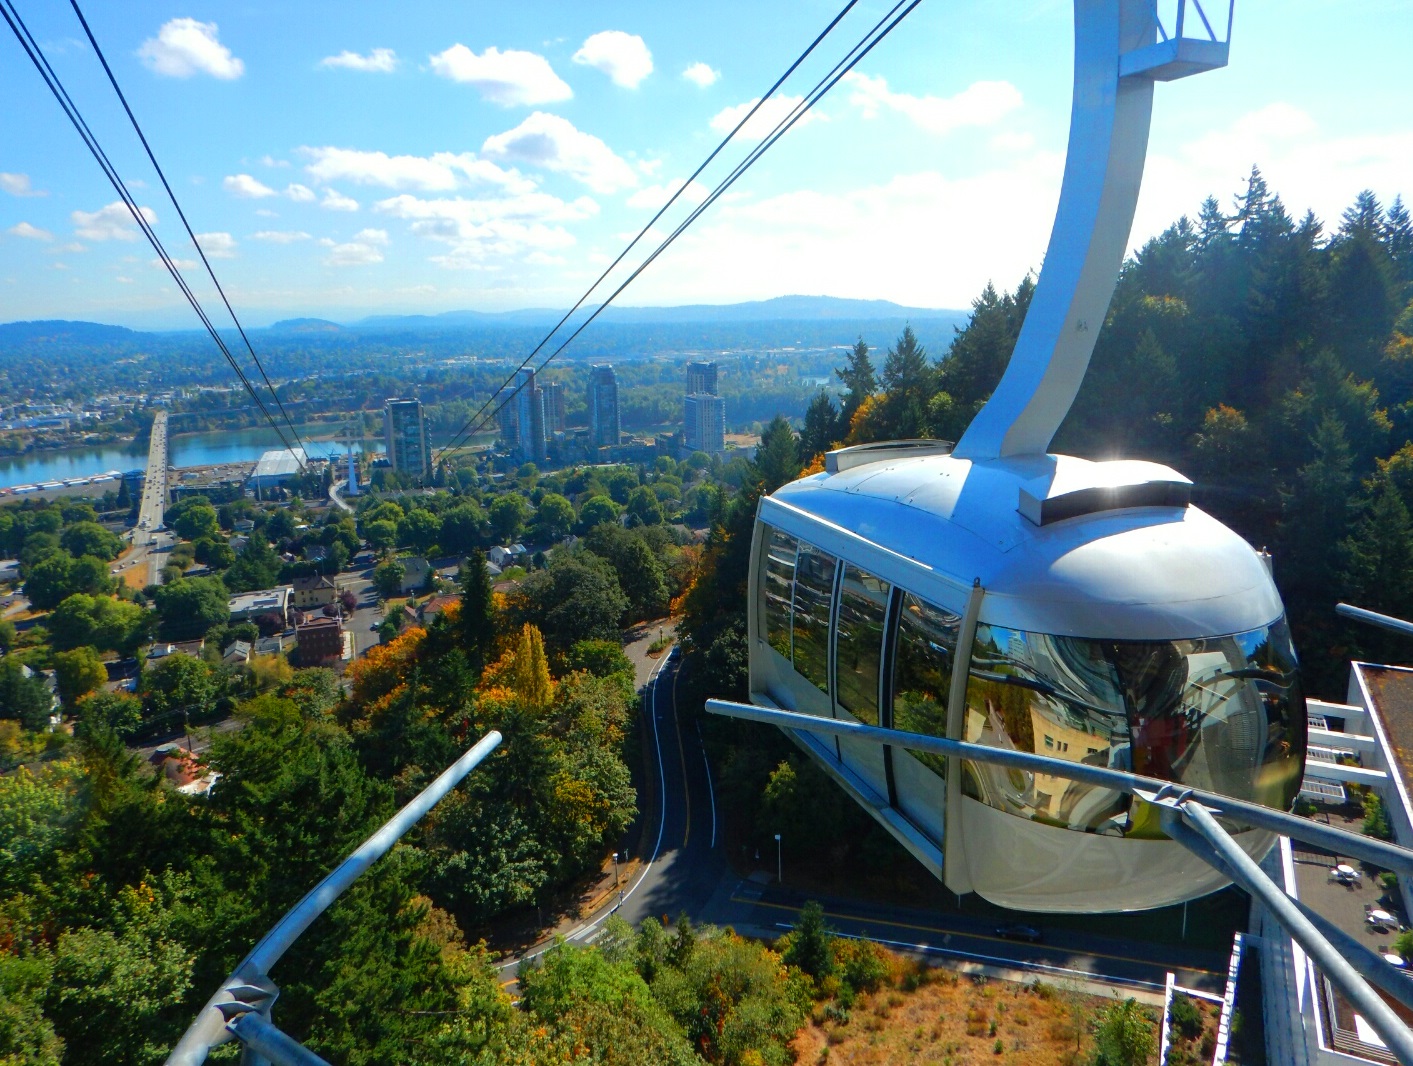 OHSU tram overlooking the Portland South Waterfront